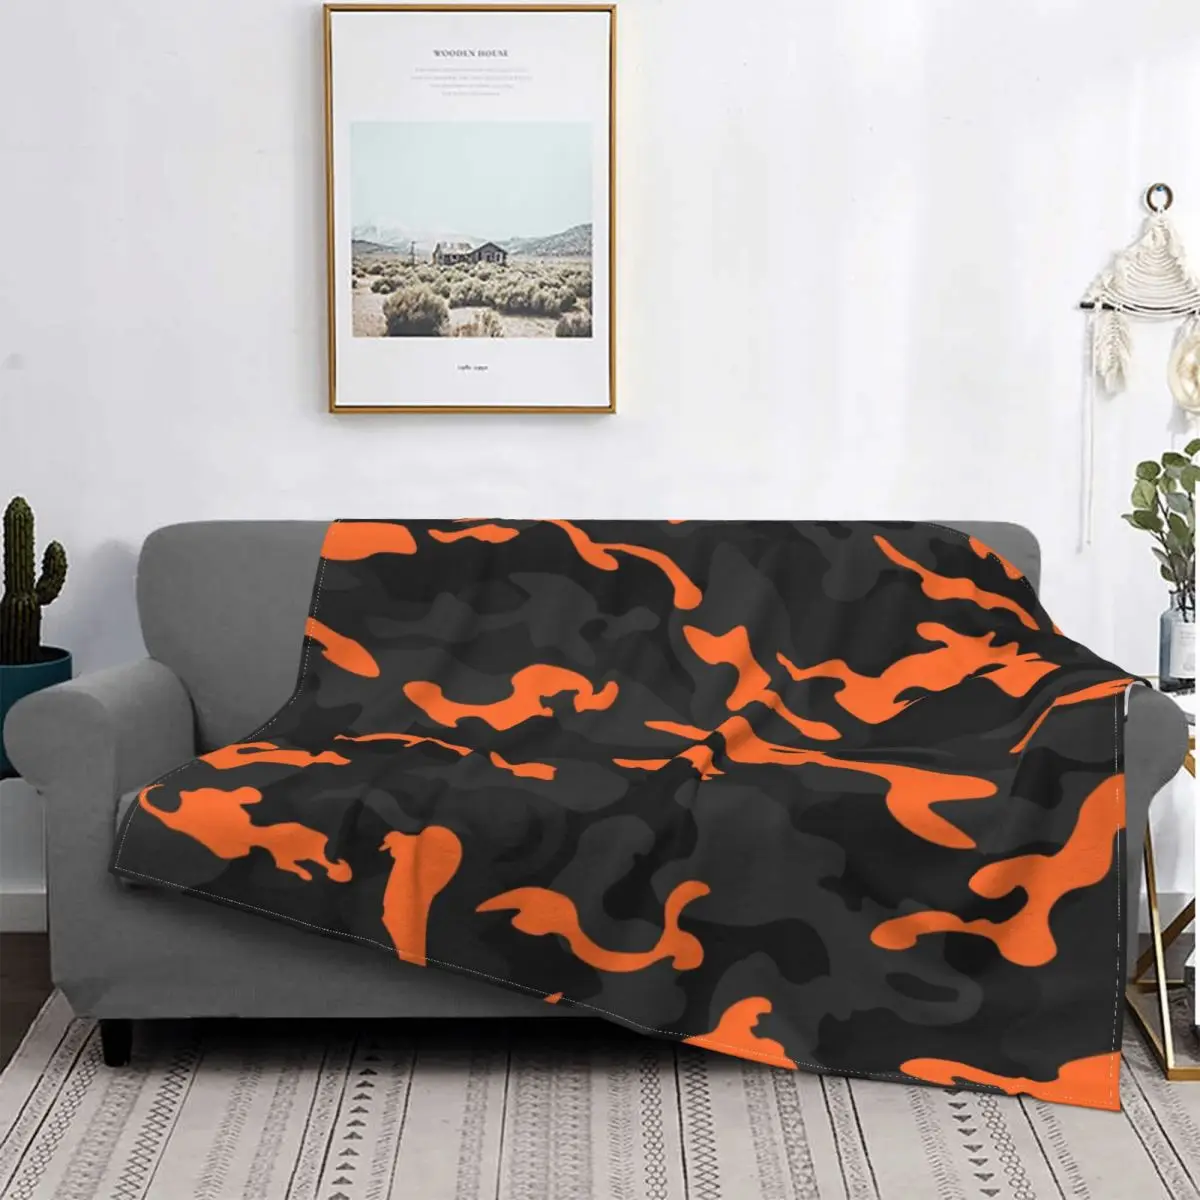 

Ultra-Soft Fleece Panther Ambush Blanket Warm Flannel Camo Soldier Blankets for Bed Office Couch Bedspreads Camouflage Throw